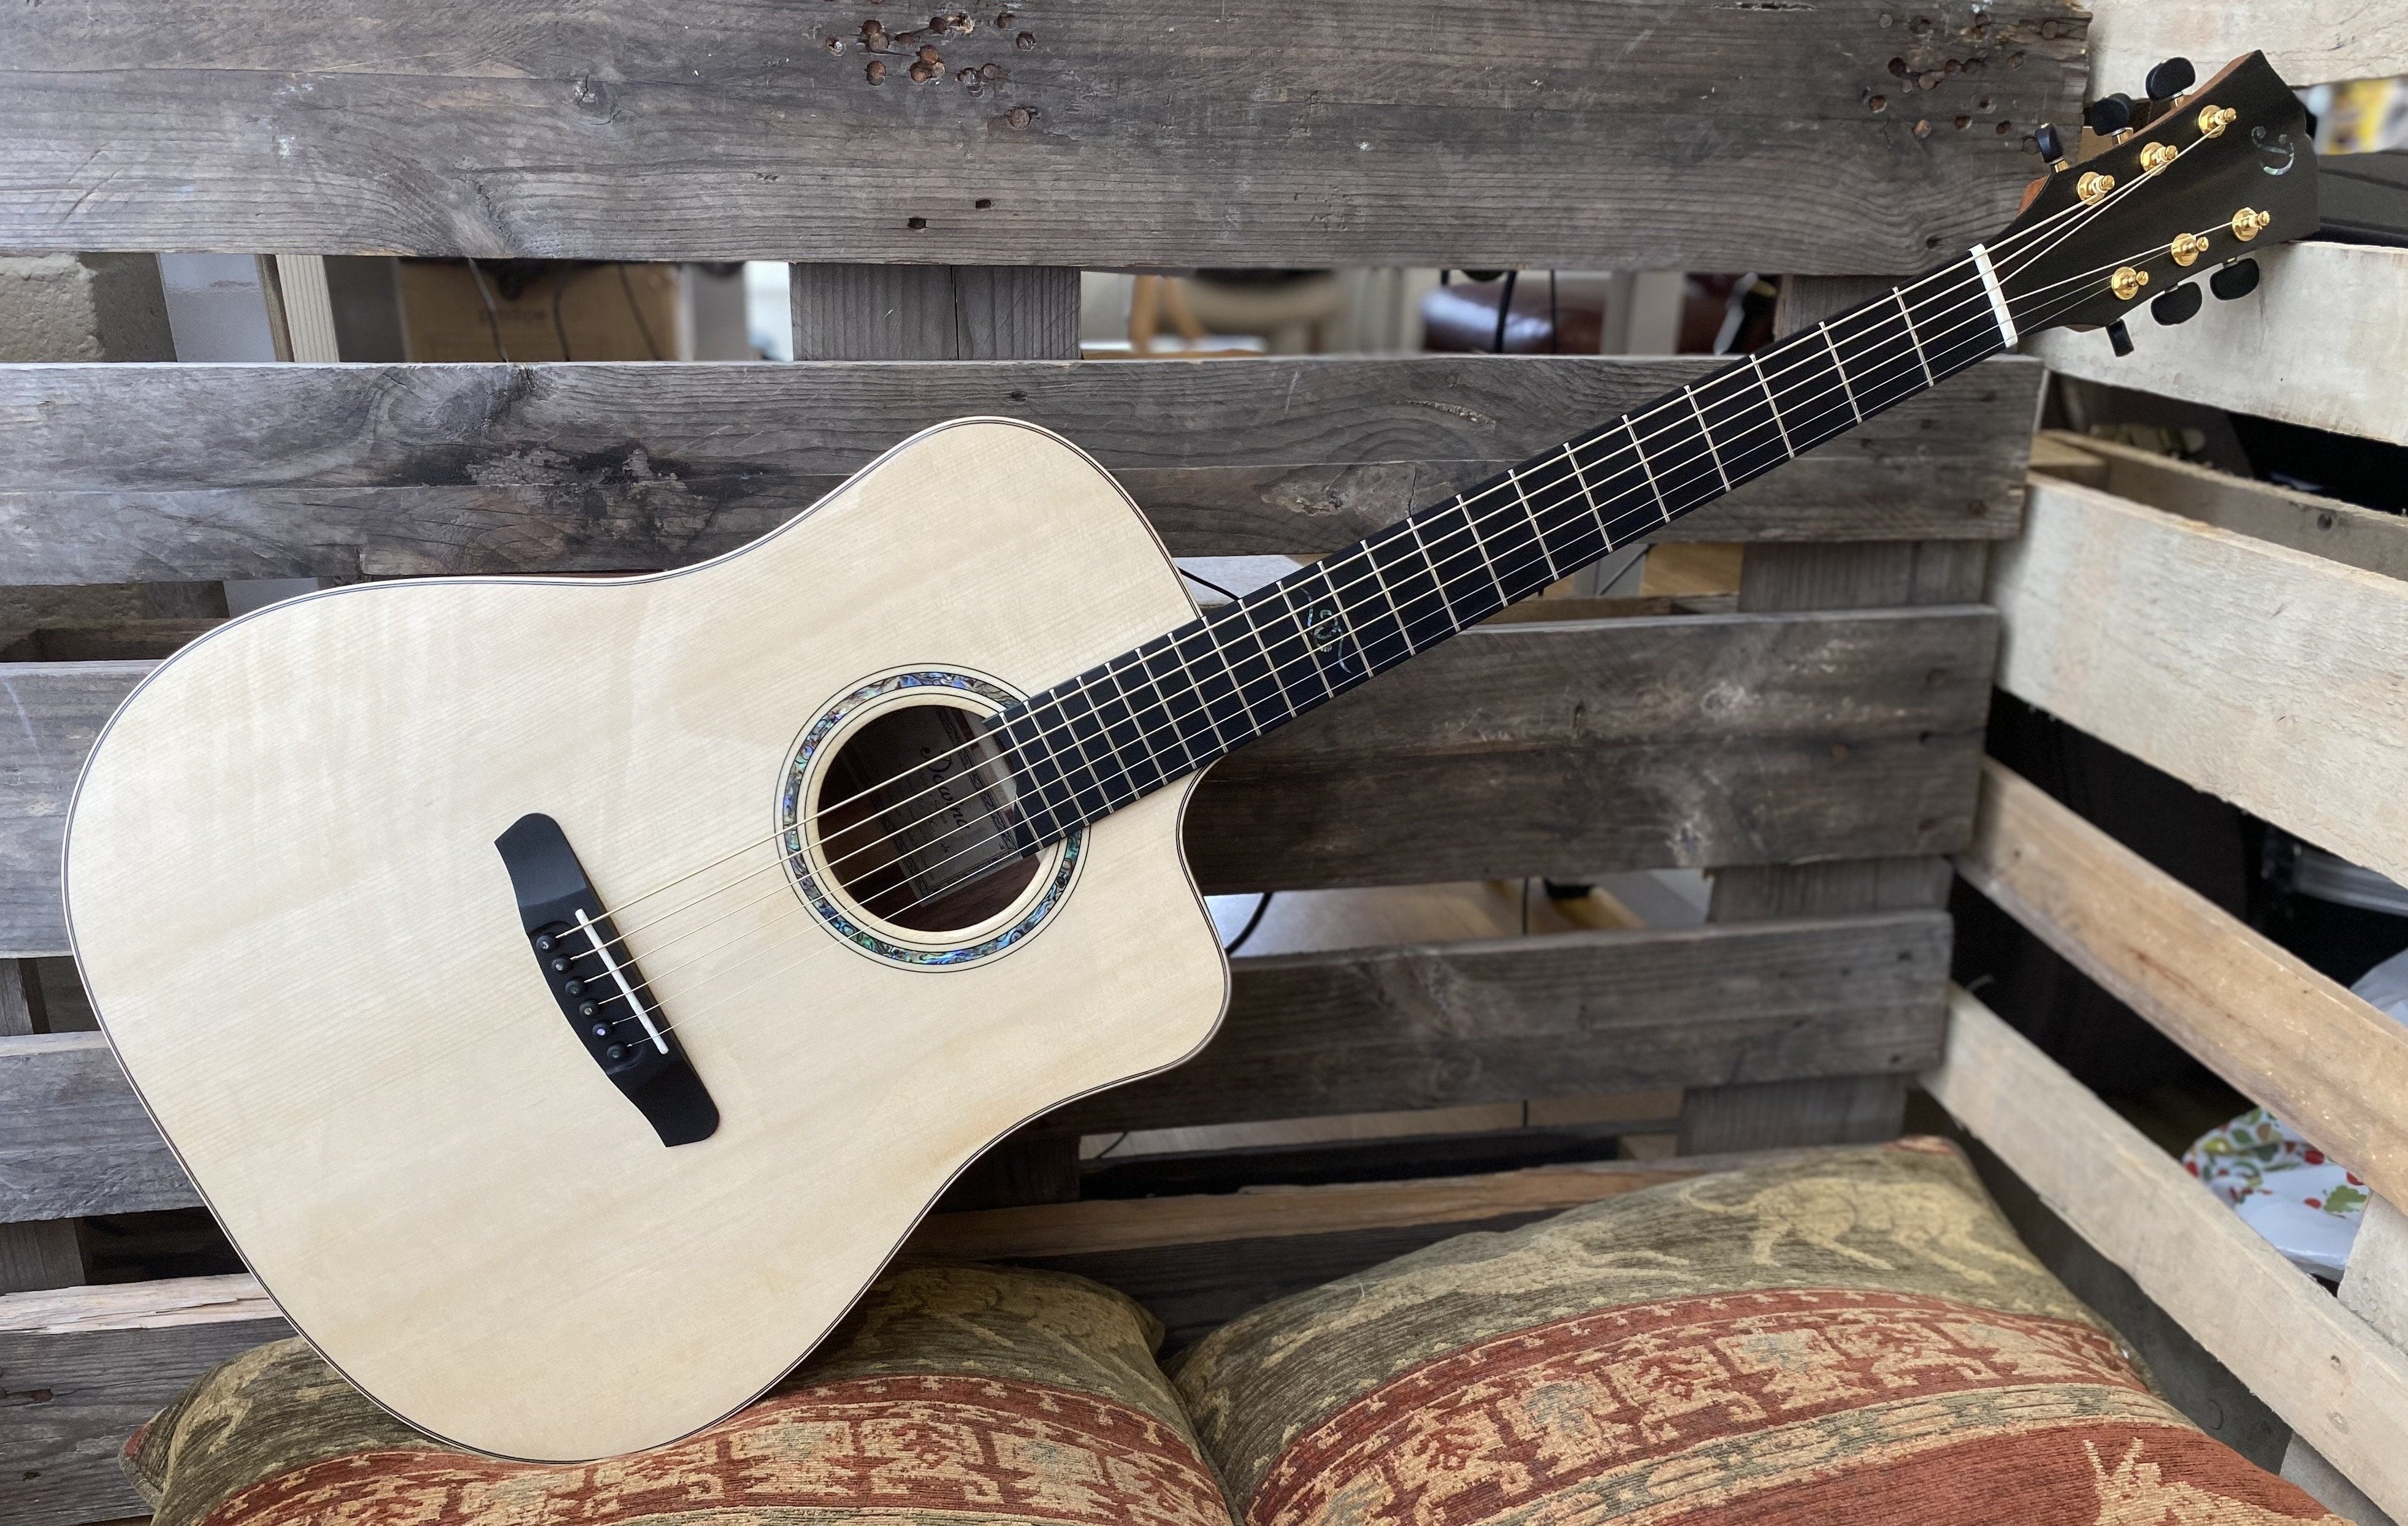 Dowina Granadillo DC DS Dolomite Spruce, Acoustic Guitar for sale at Richards Guitars.